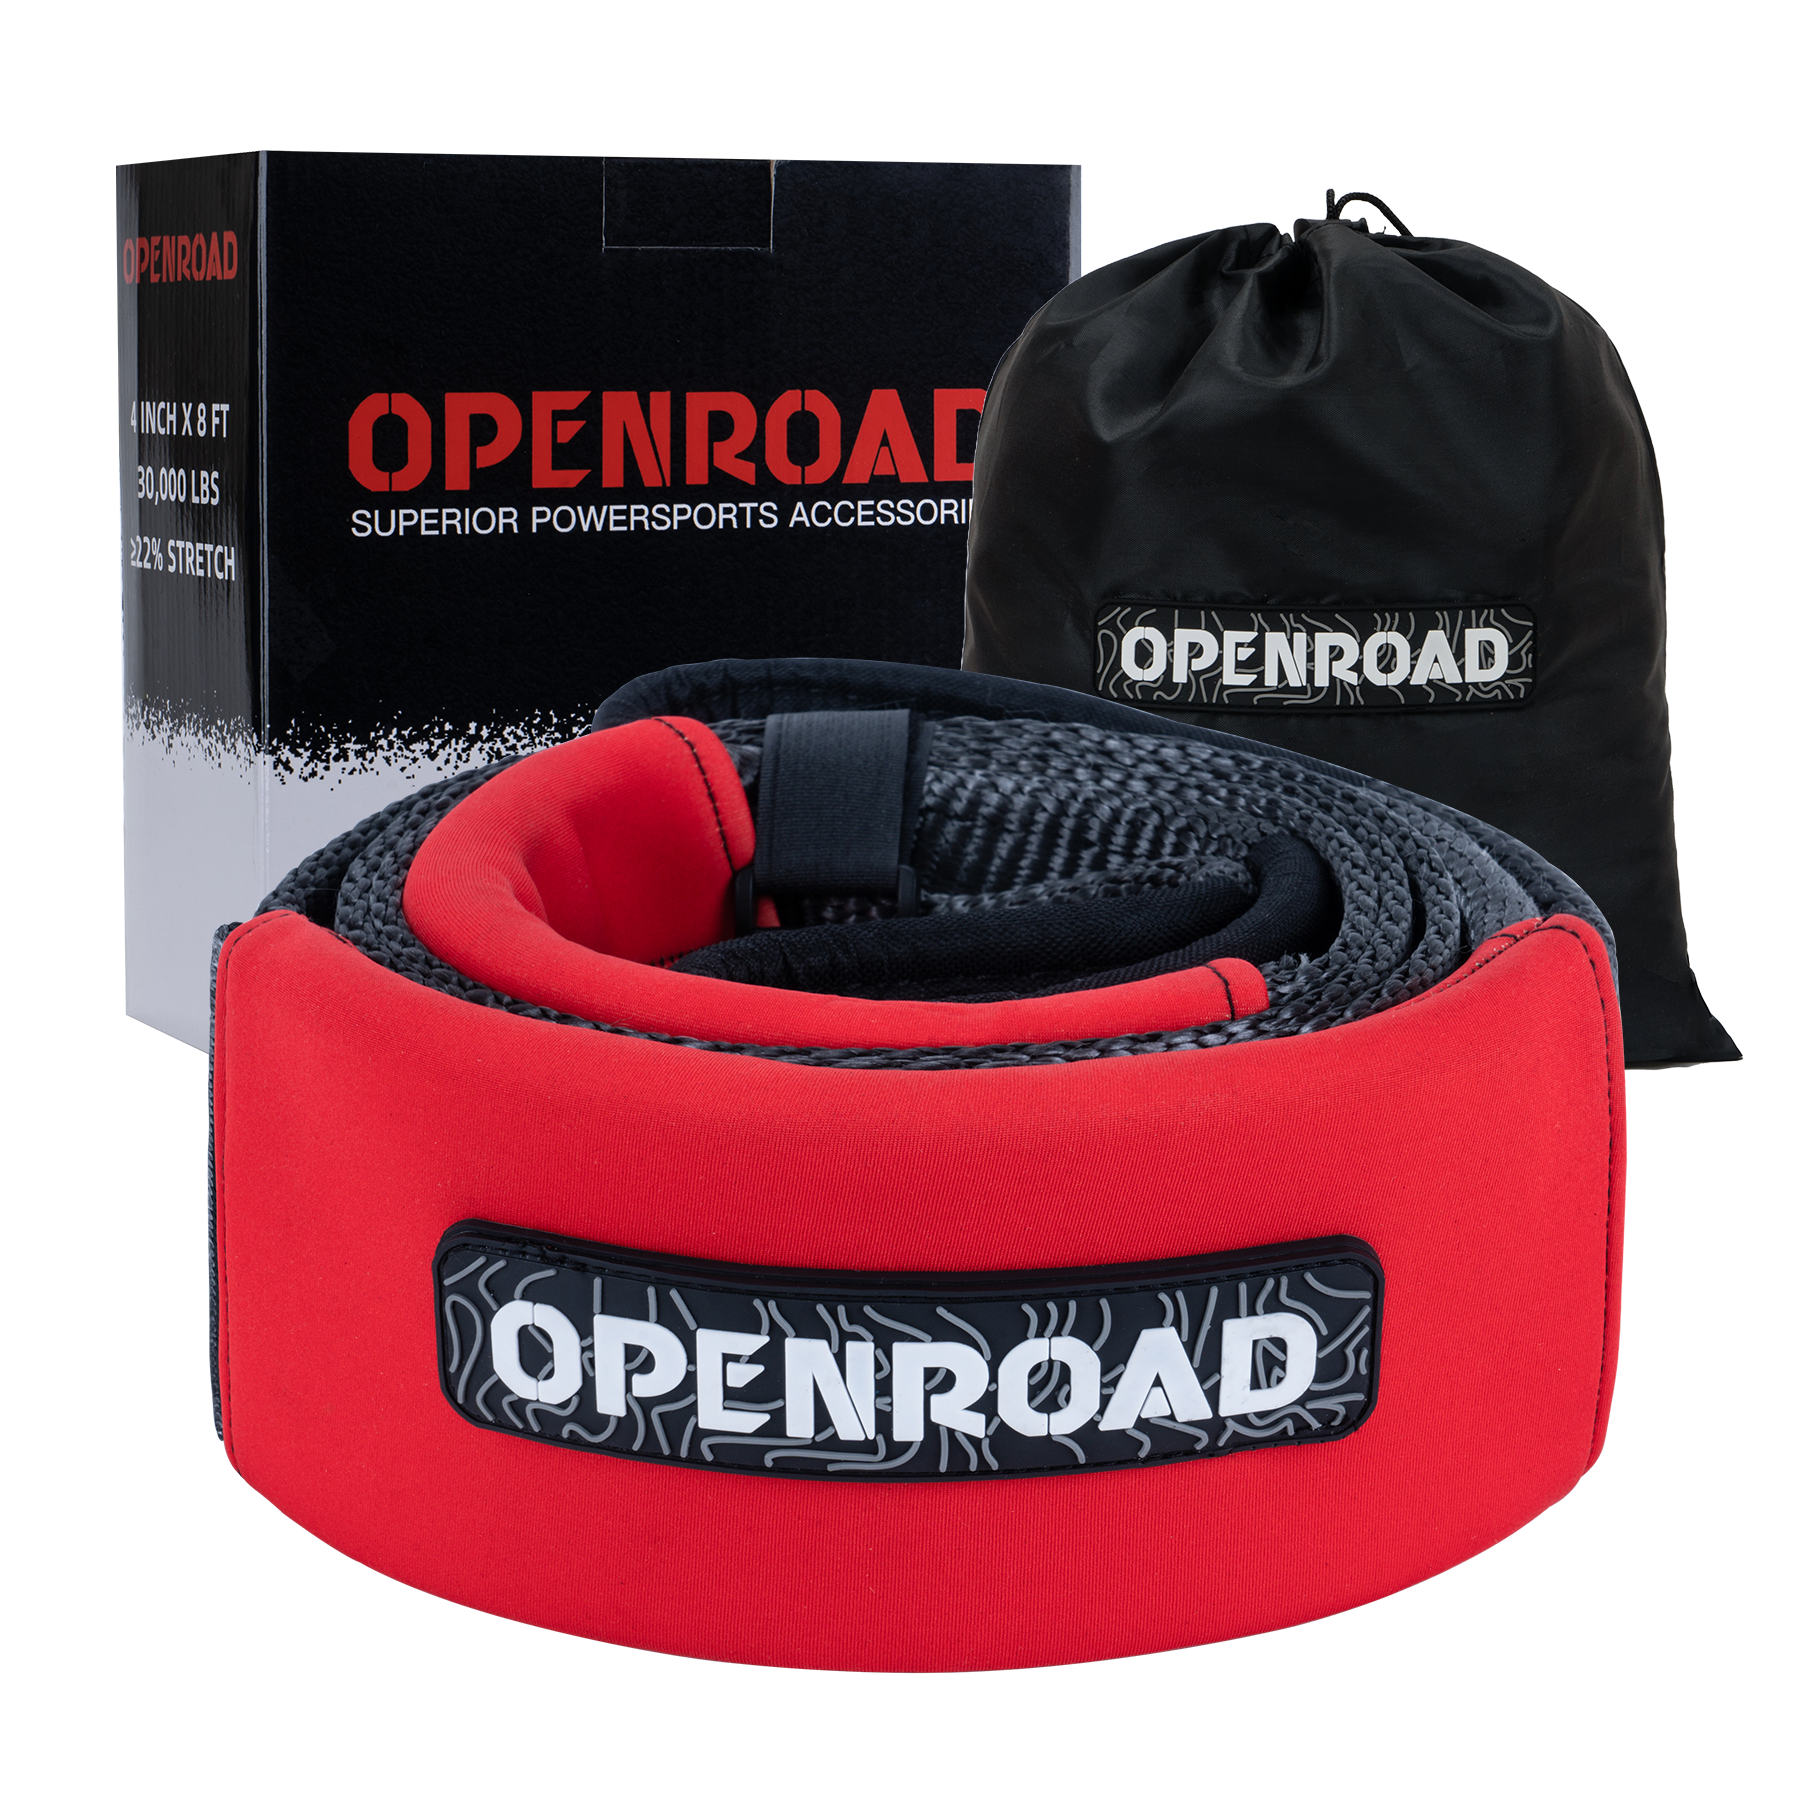 OPENROAD 4''x8' Break Strength 40,000 lbs Tree Saver Strap, Triple Reinforced Webbing. Towing Rope OPENROAD 40000 lbs 4''x8' Tree Saver Stra  